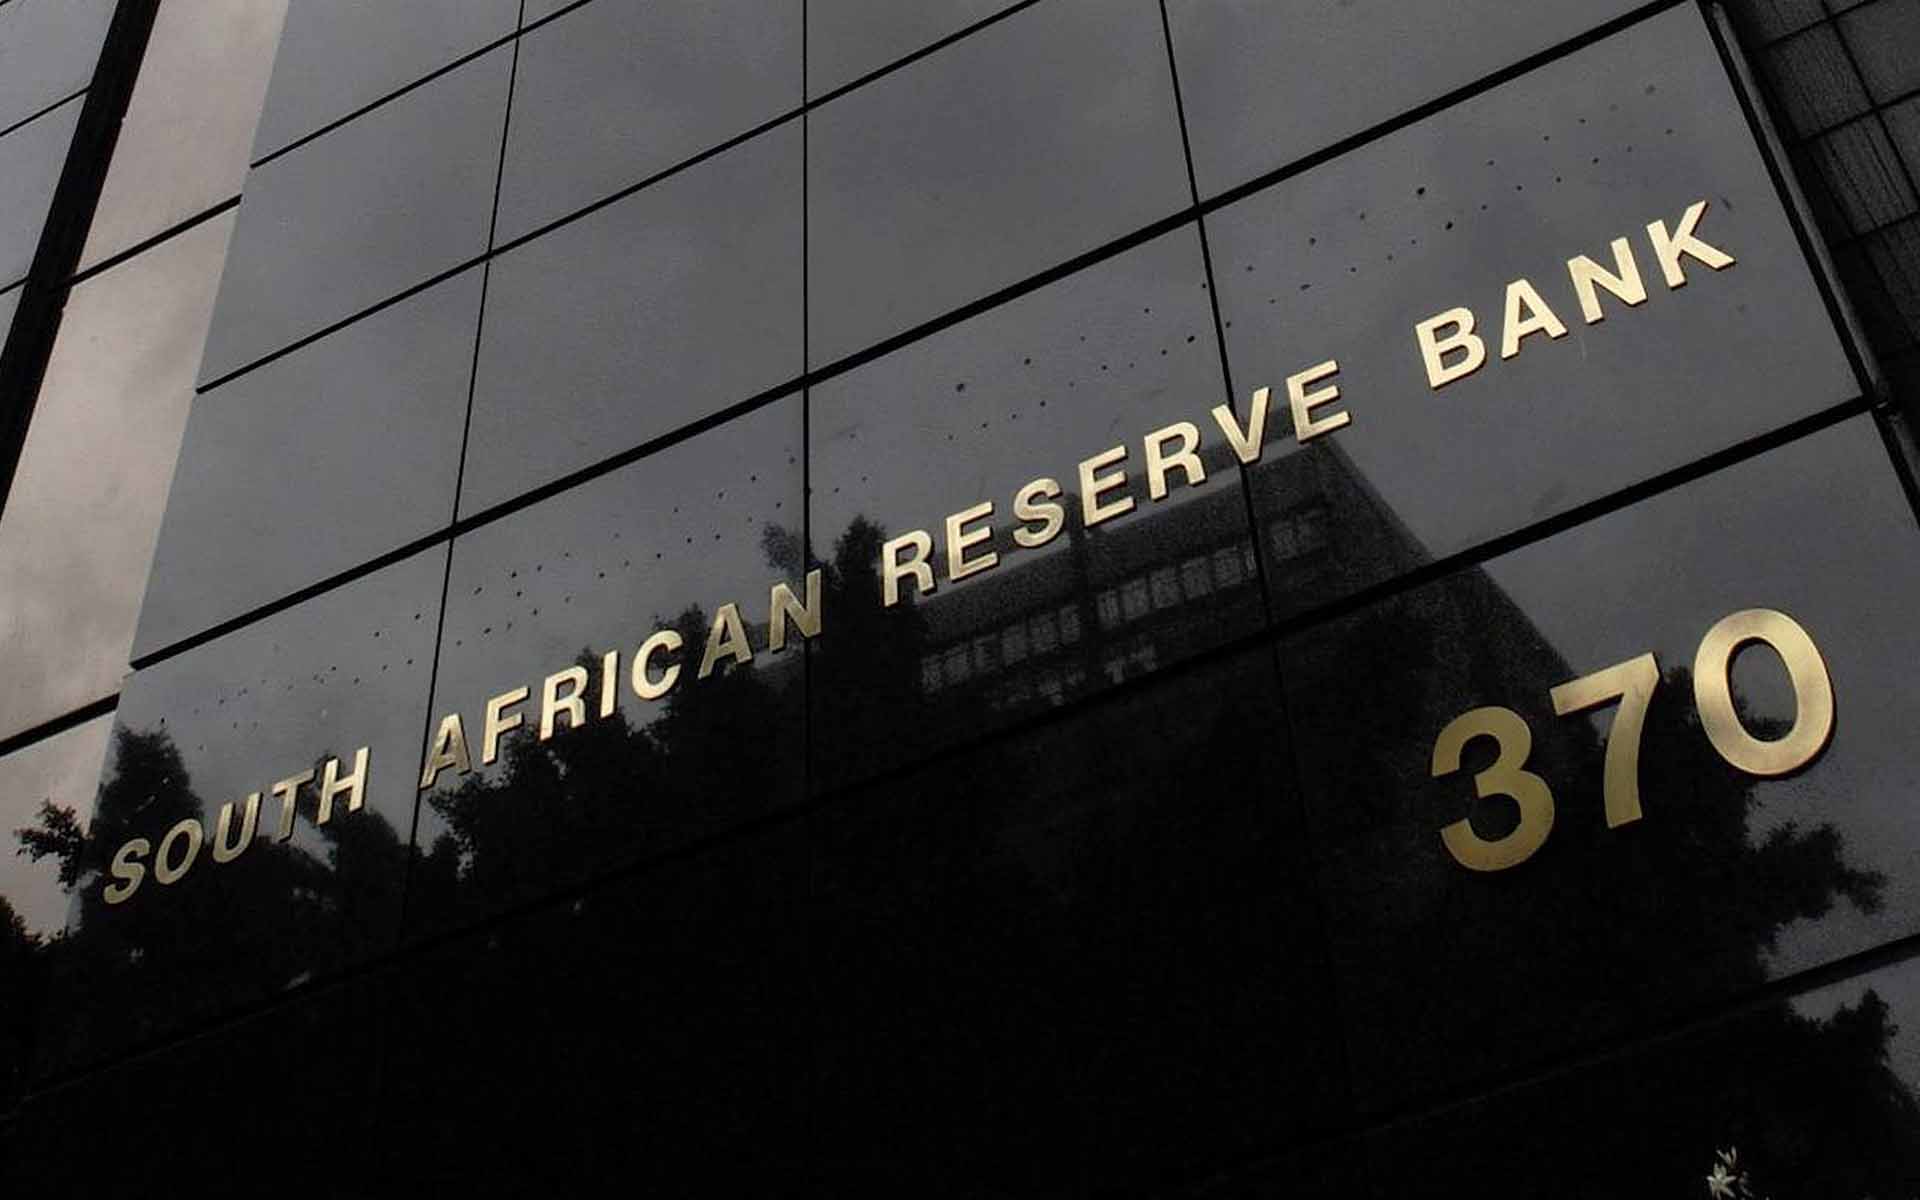 The South African Reserve Bank to Introduce New Crypto Rules to Stop Currency Controls – BitcoinKE